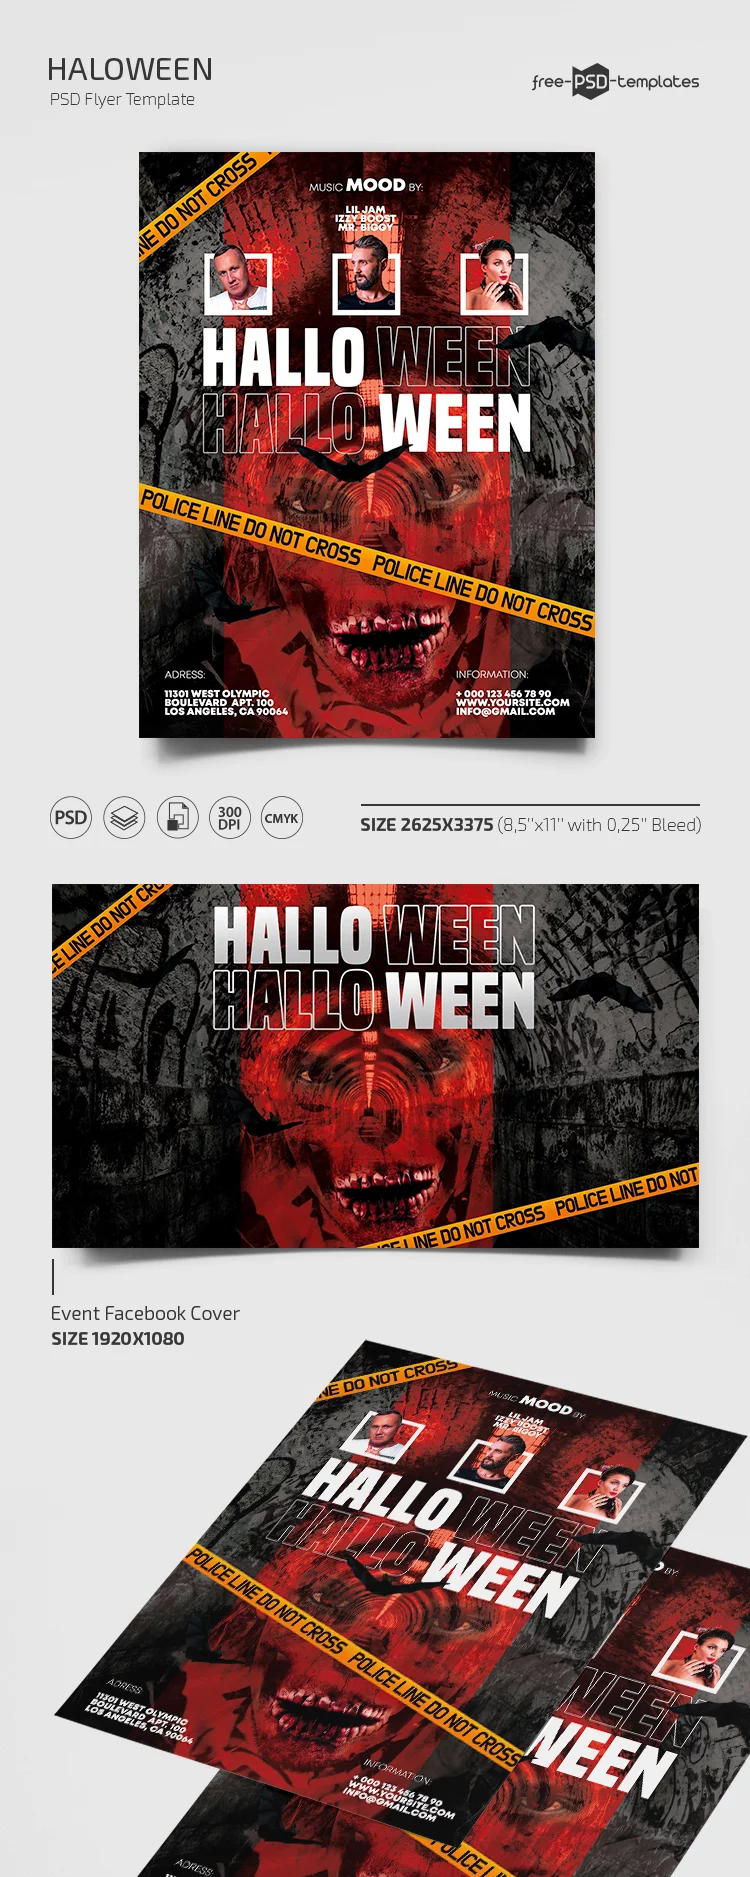 Free Halloween Flyer Template in PSD